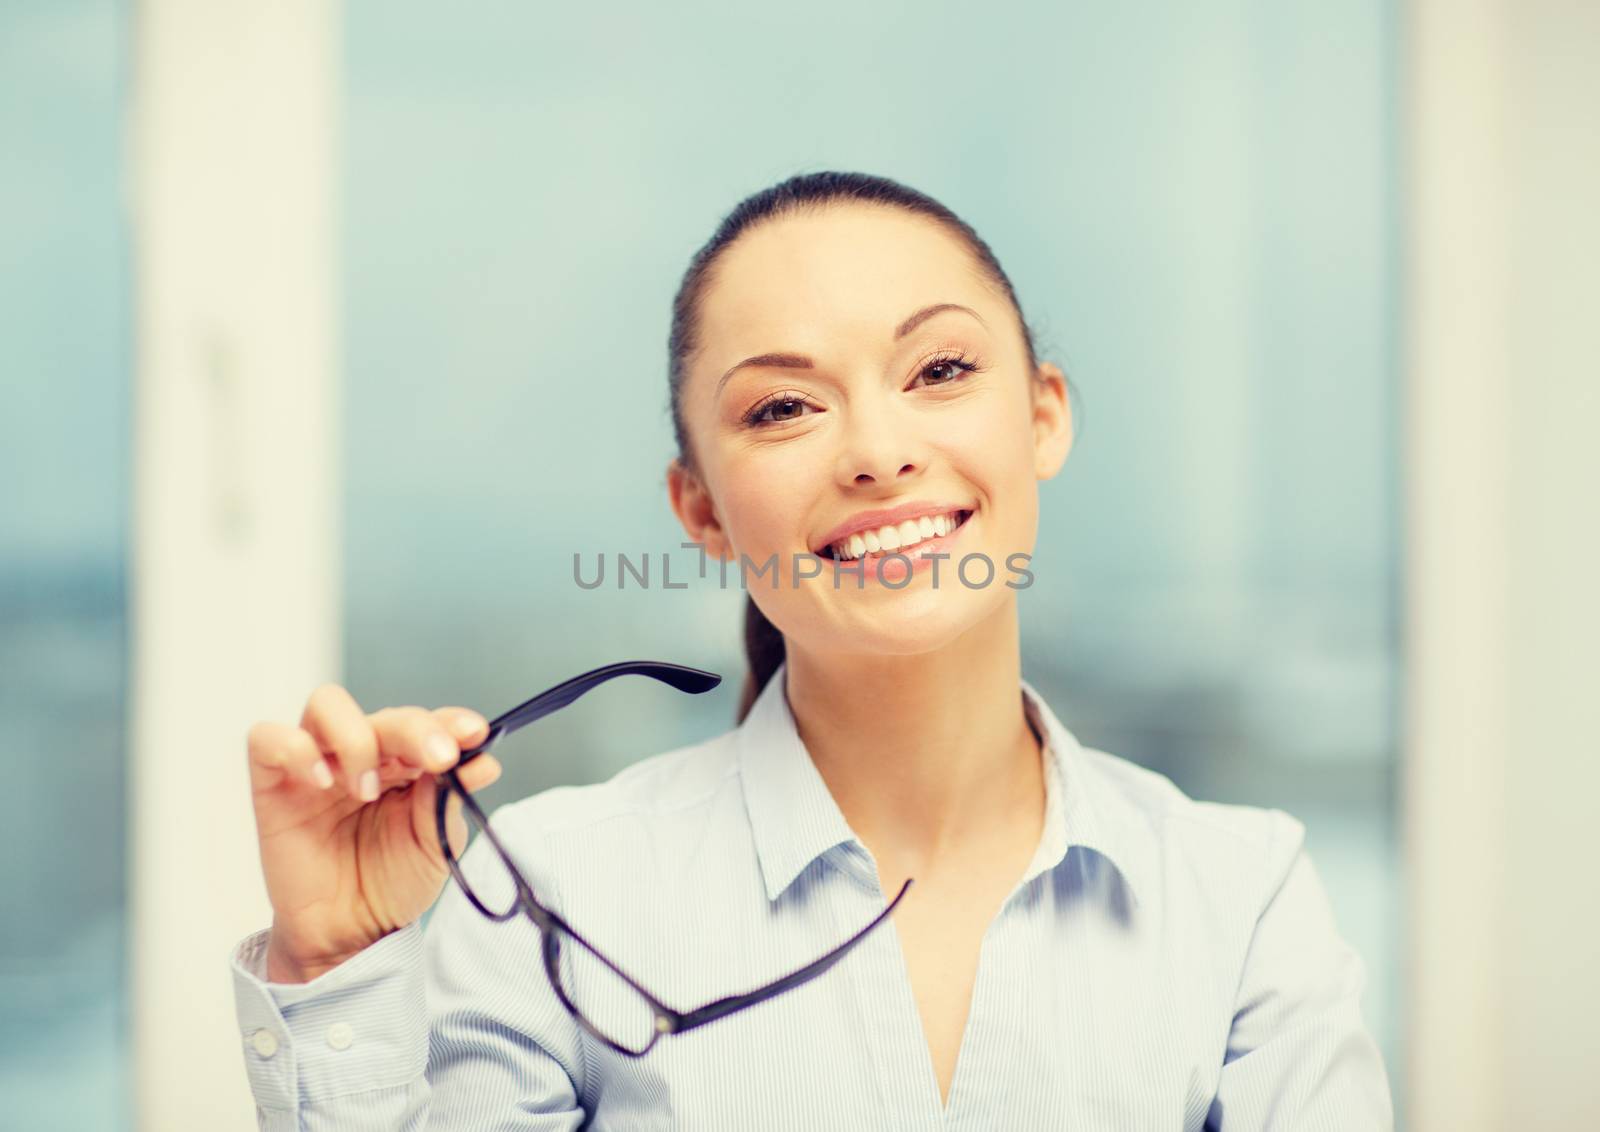 business and education concept - laughing businesswoman with eyeglasses